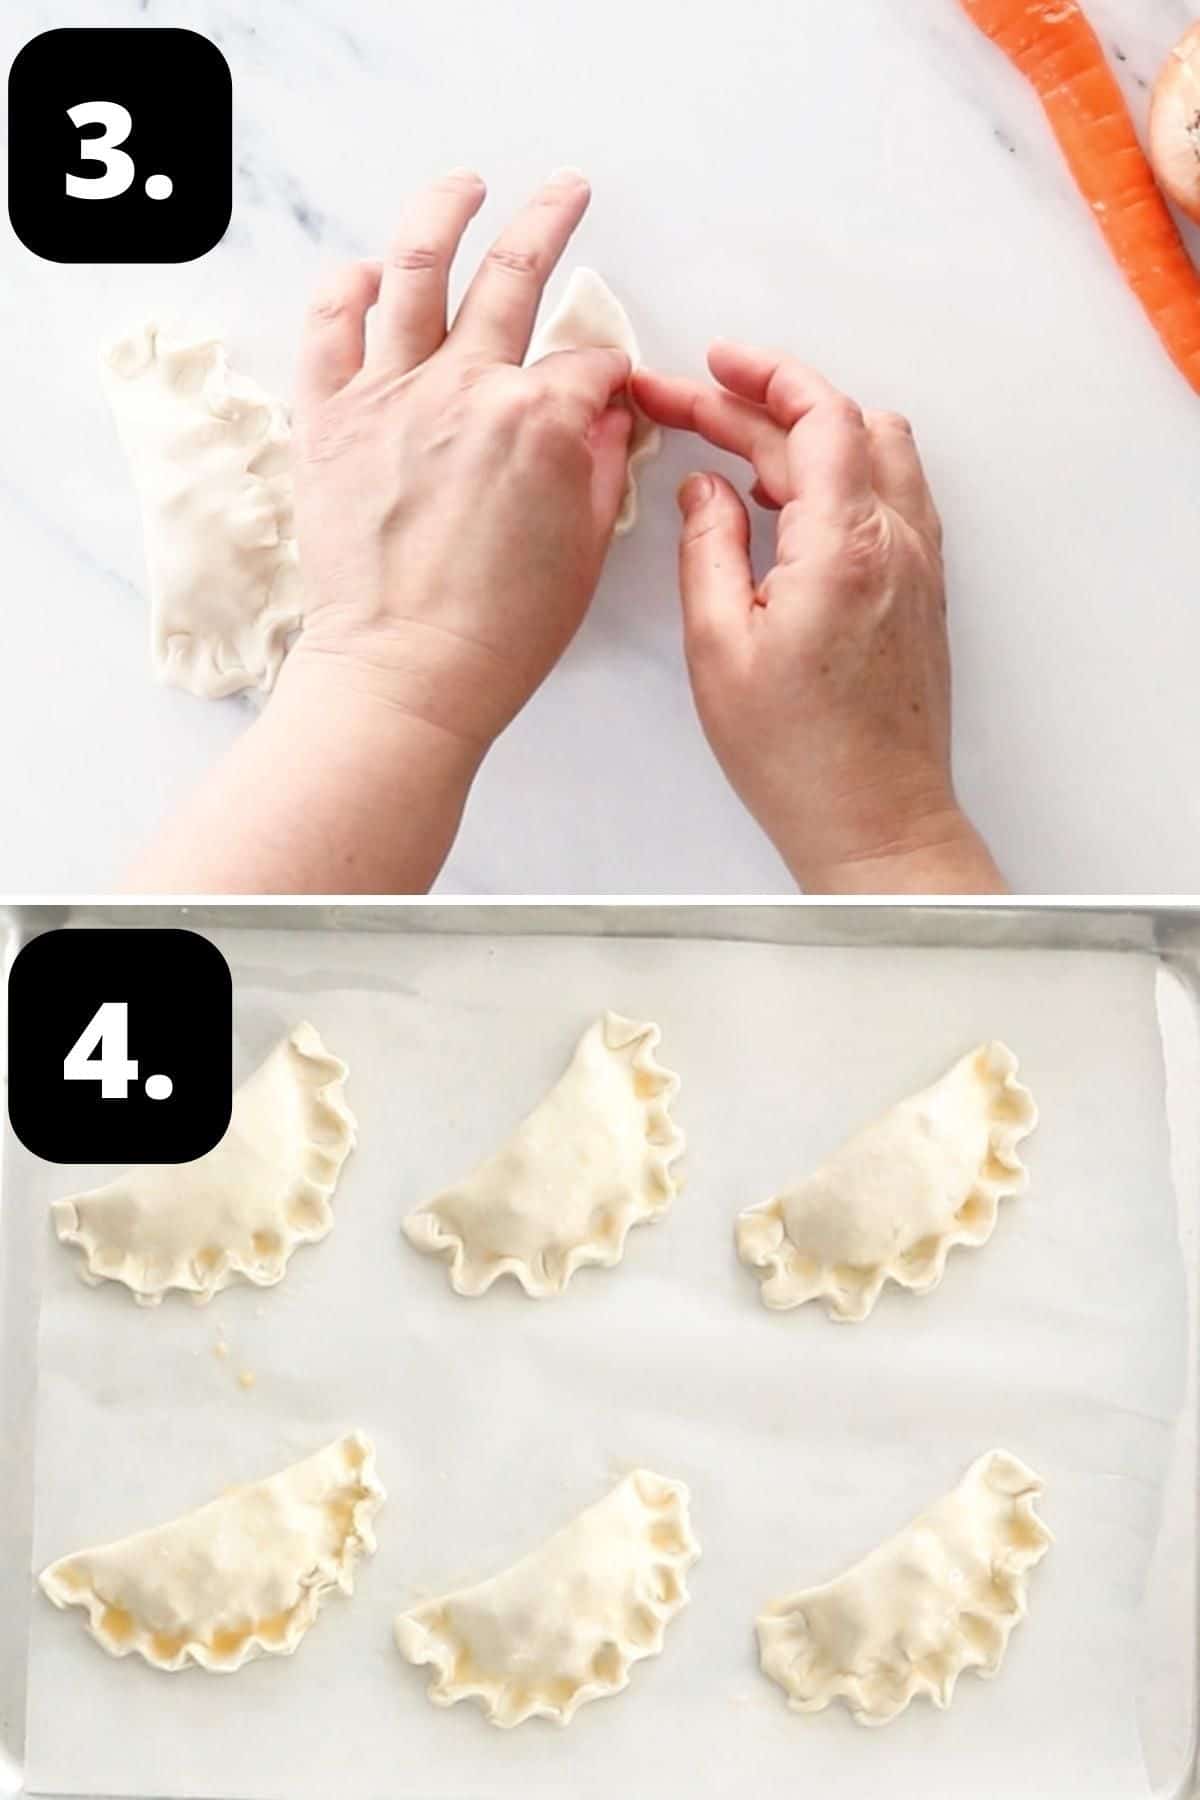 Steps 3-4 of preparing this recipe - shaping the pasties and the uncooked pasties on a tray ready to be baked.